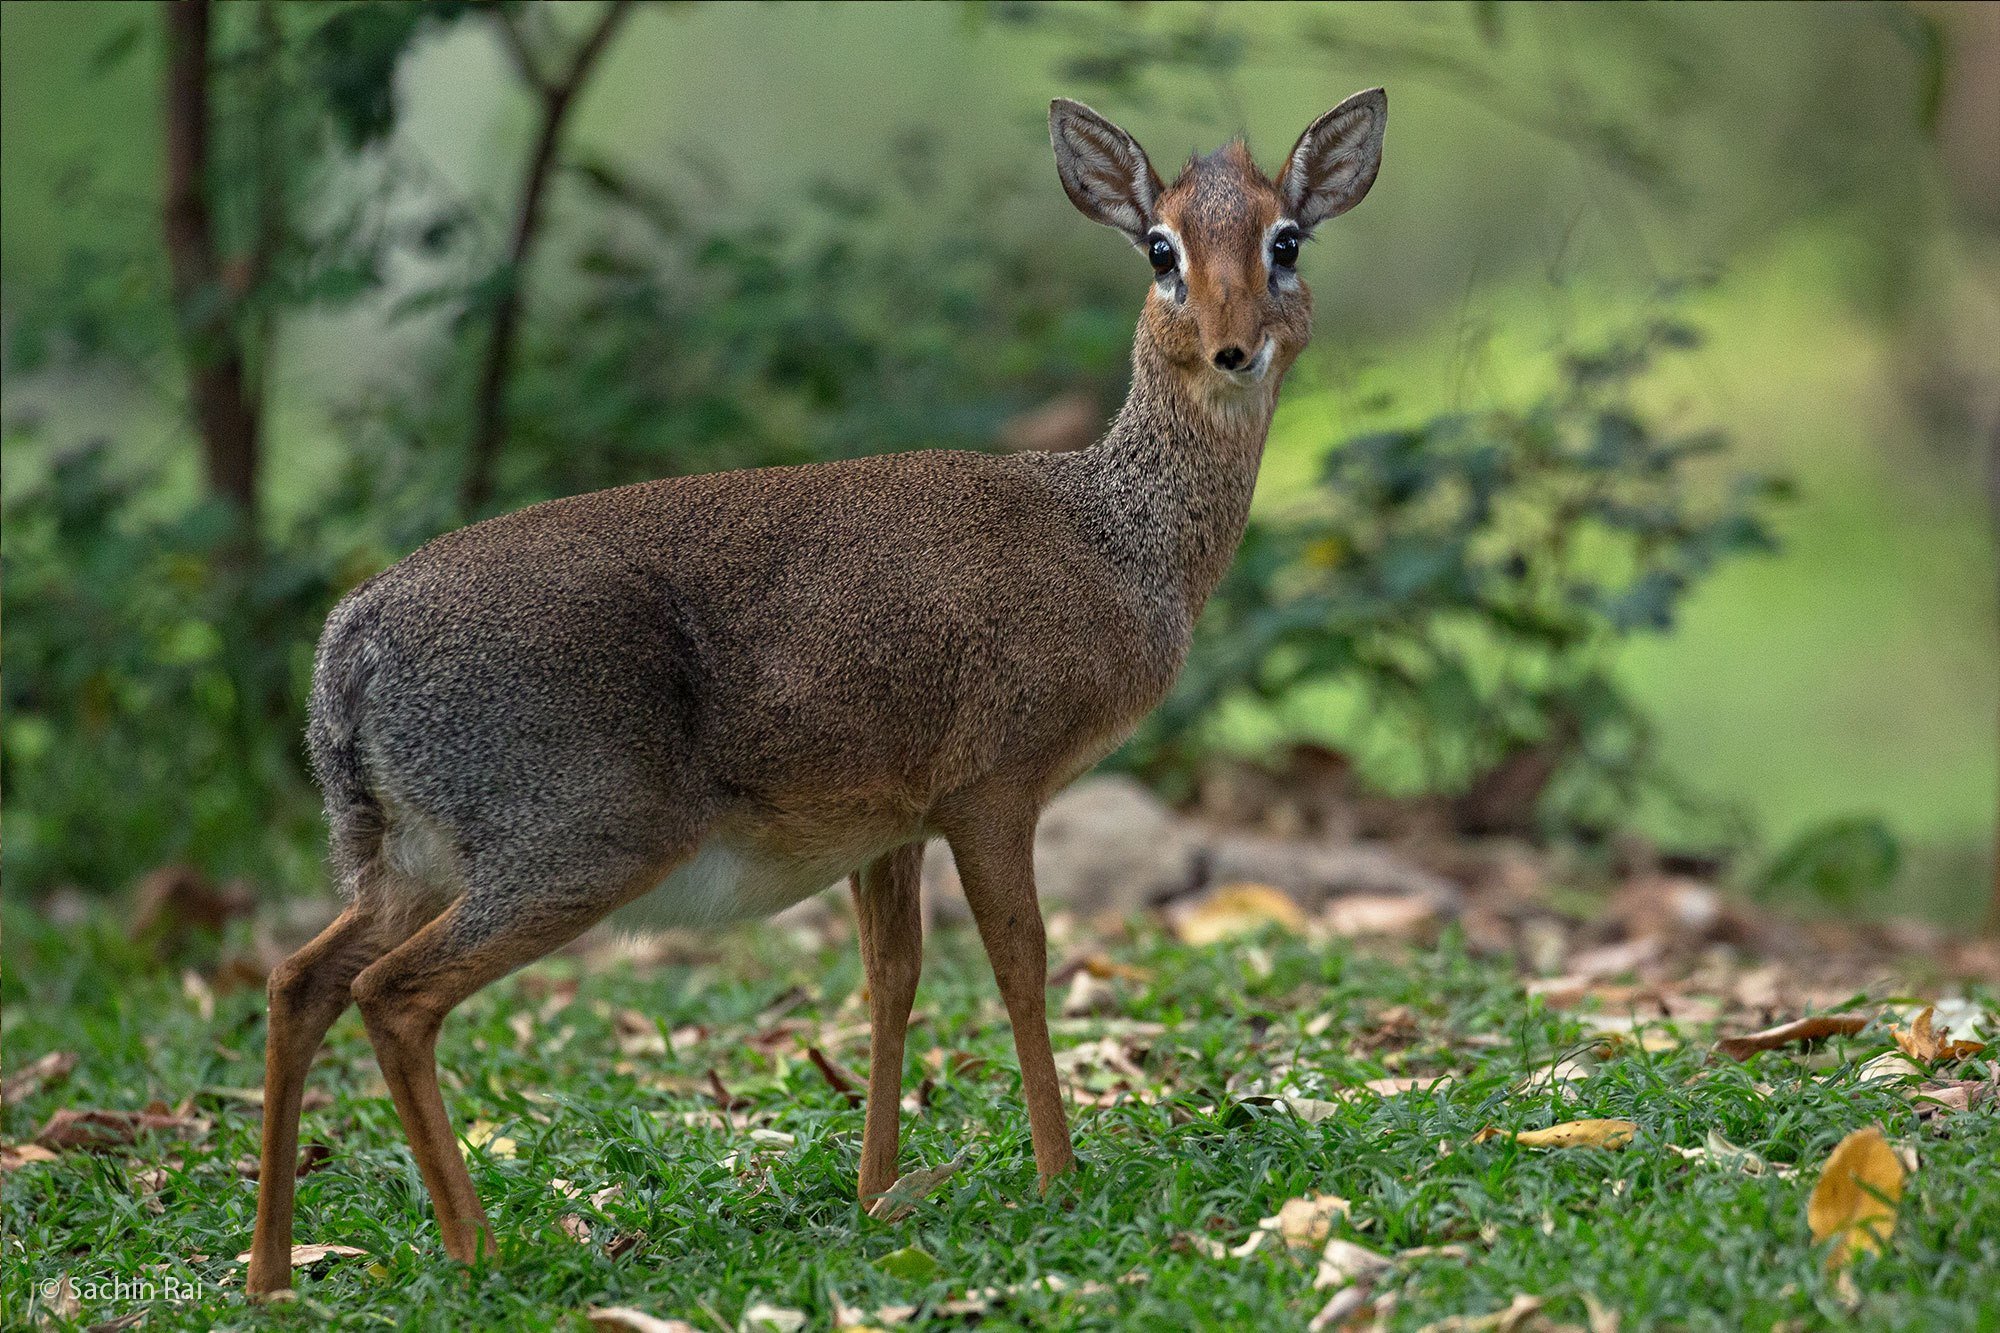 Some Cool Facts About the Dik-Dik